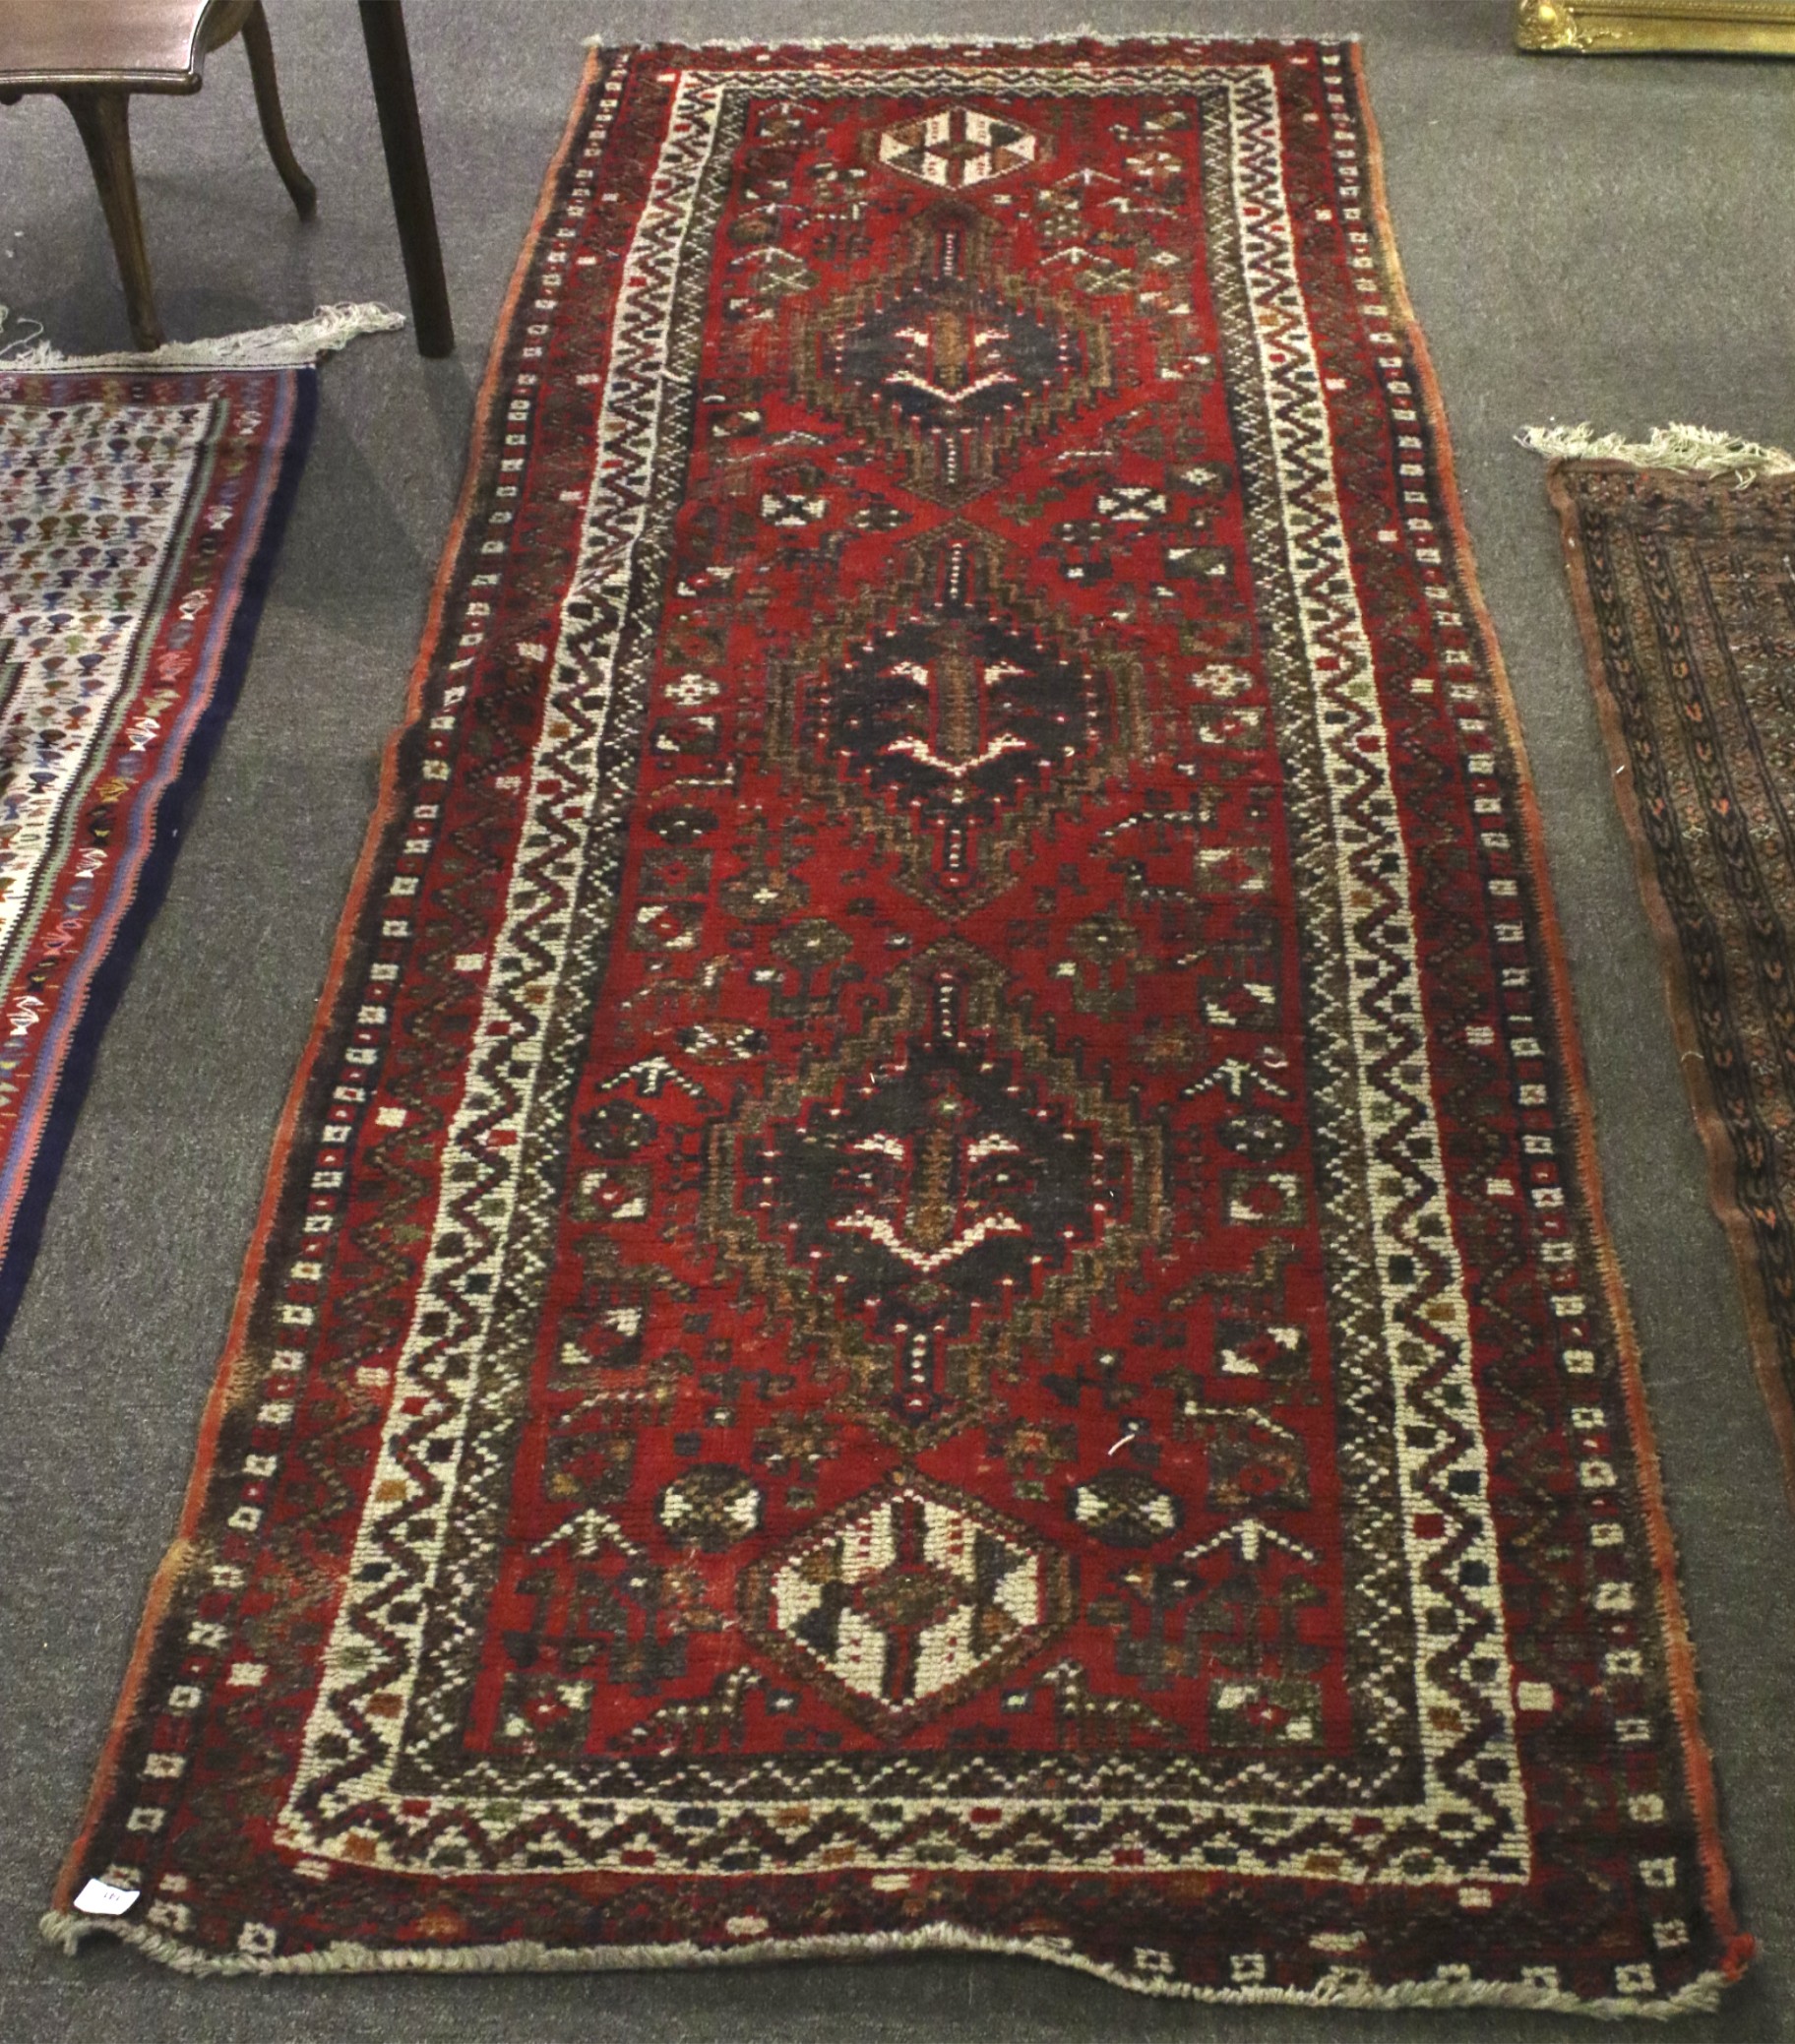 A Kilim style wool rug/ carpet runner. With red ground, geometric border and animal figures.